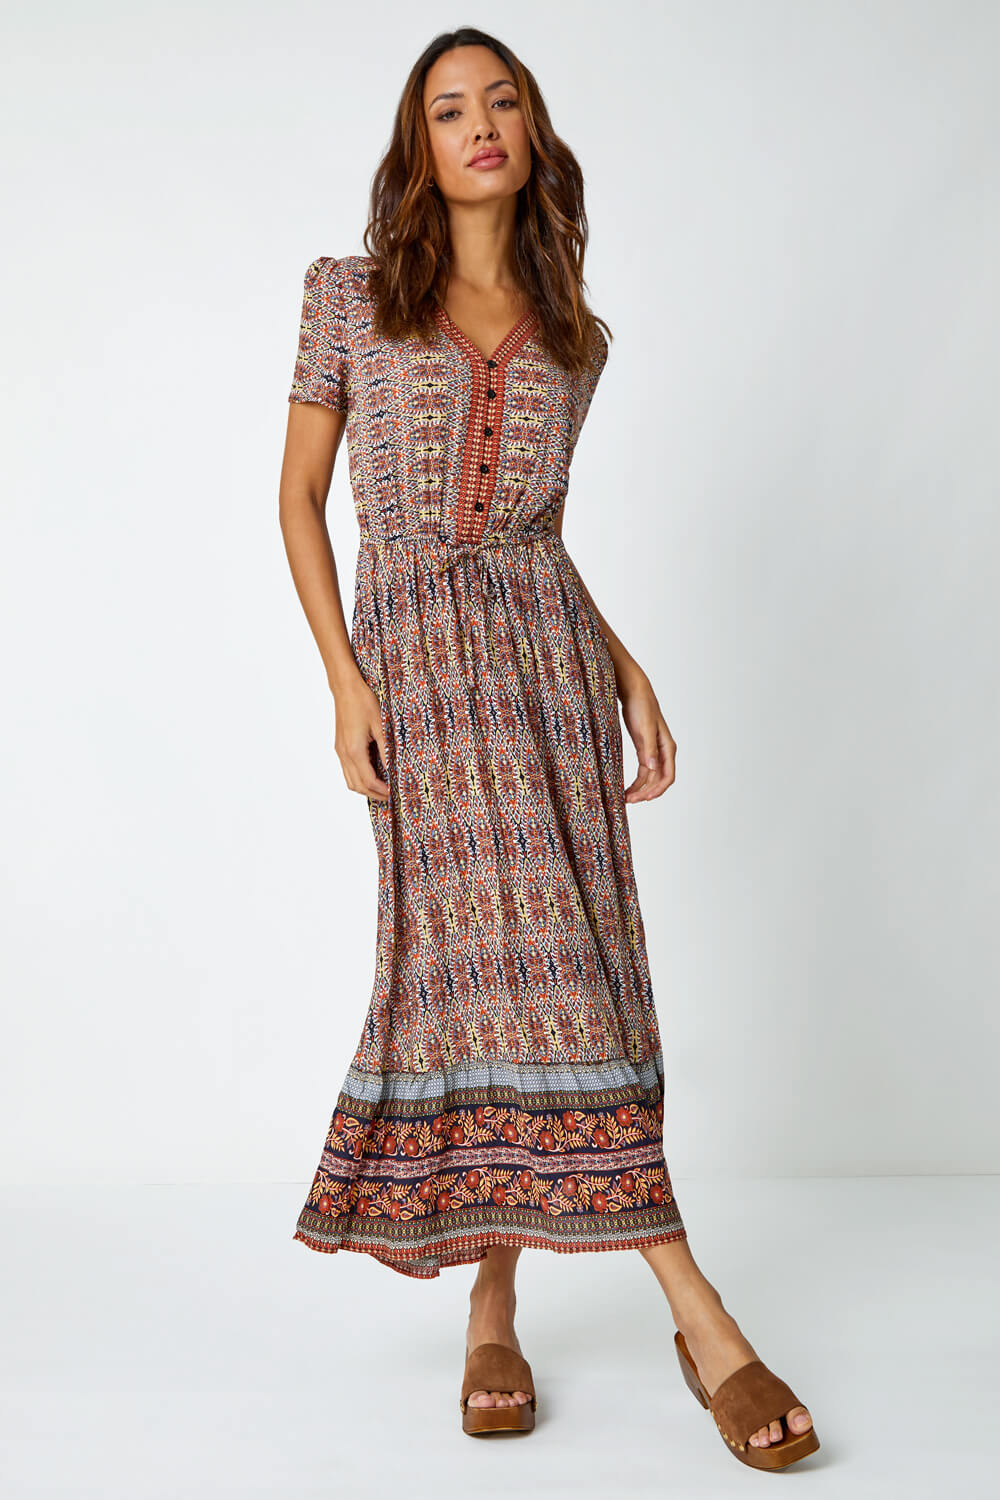 Rust Boho Print Fit and Flare Maxi Dress, Image 2 of 5